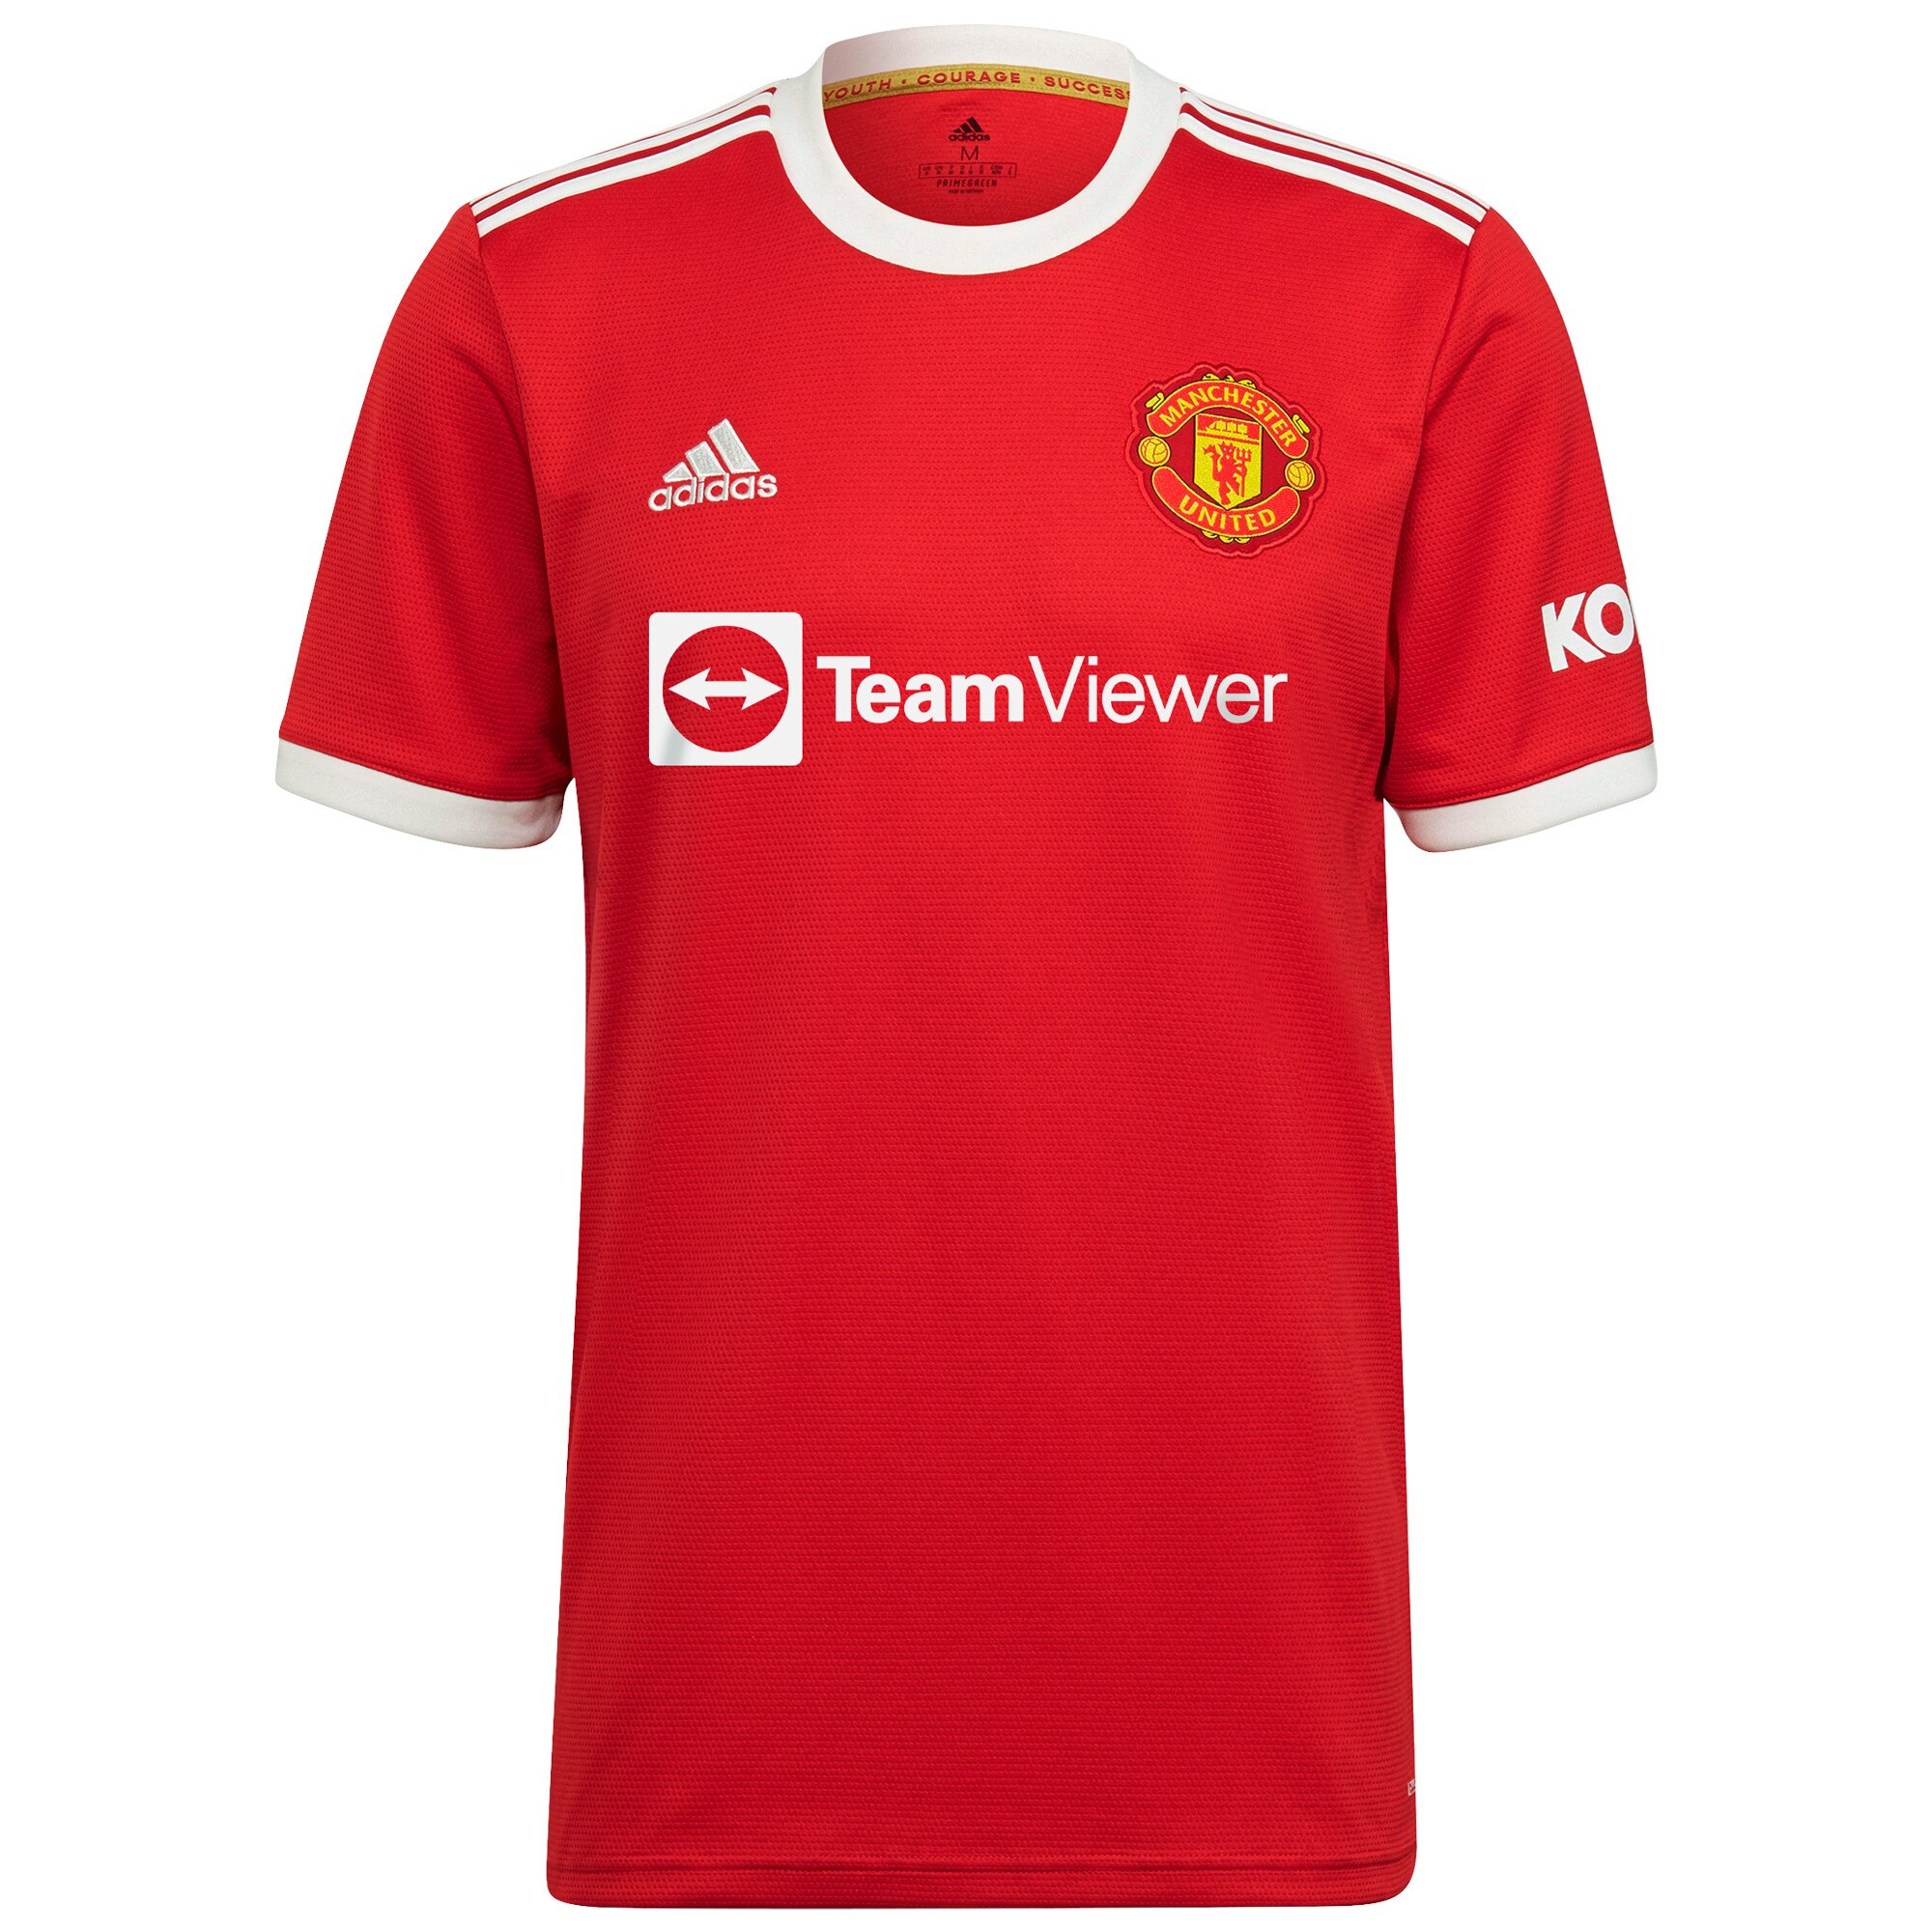 Manchester United Cup Home Shirt 2021-22 with Amad 16 printing